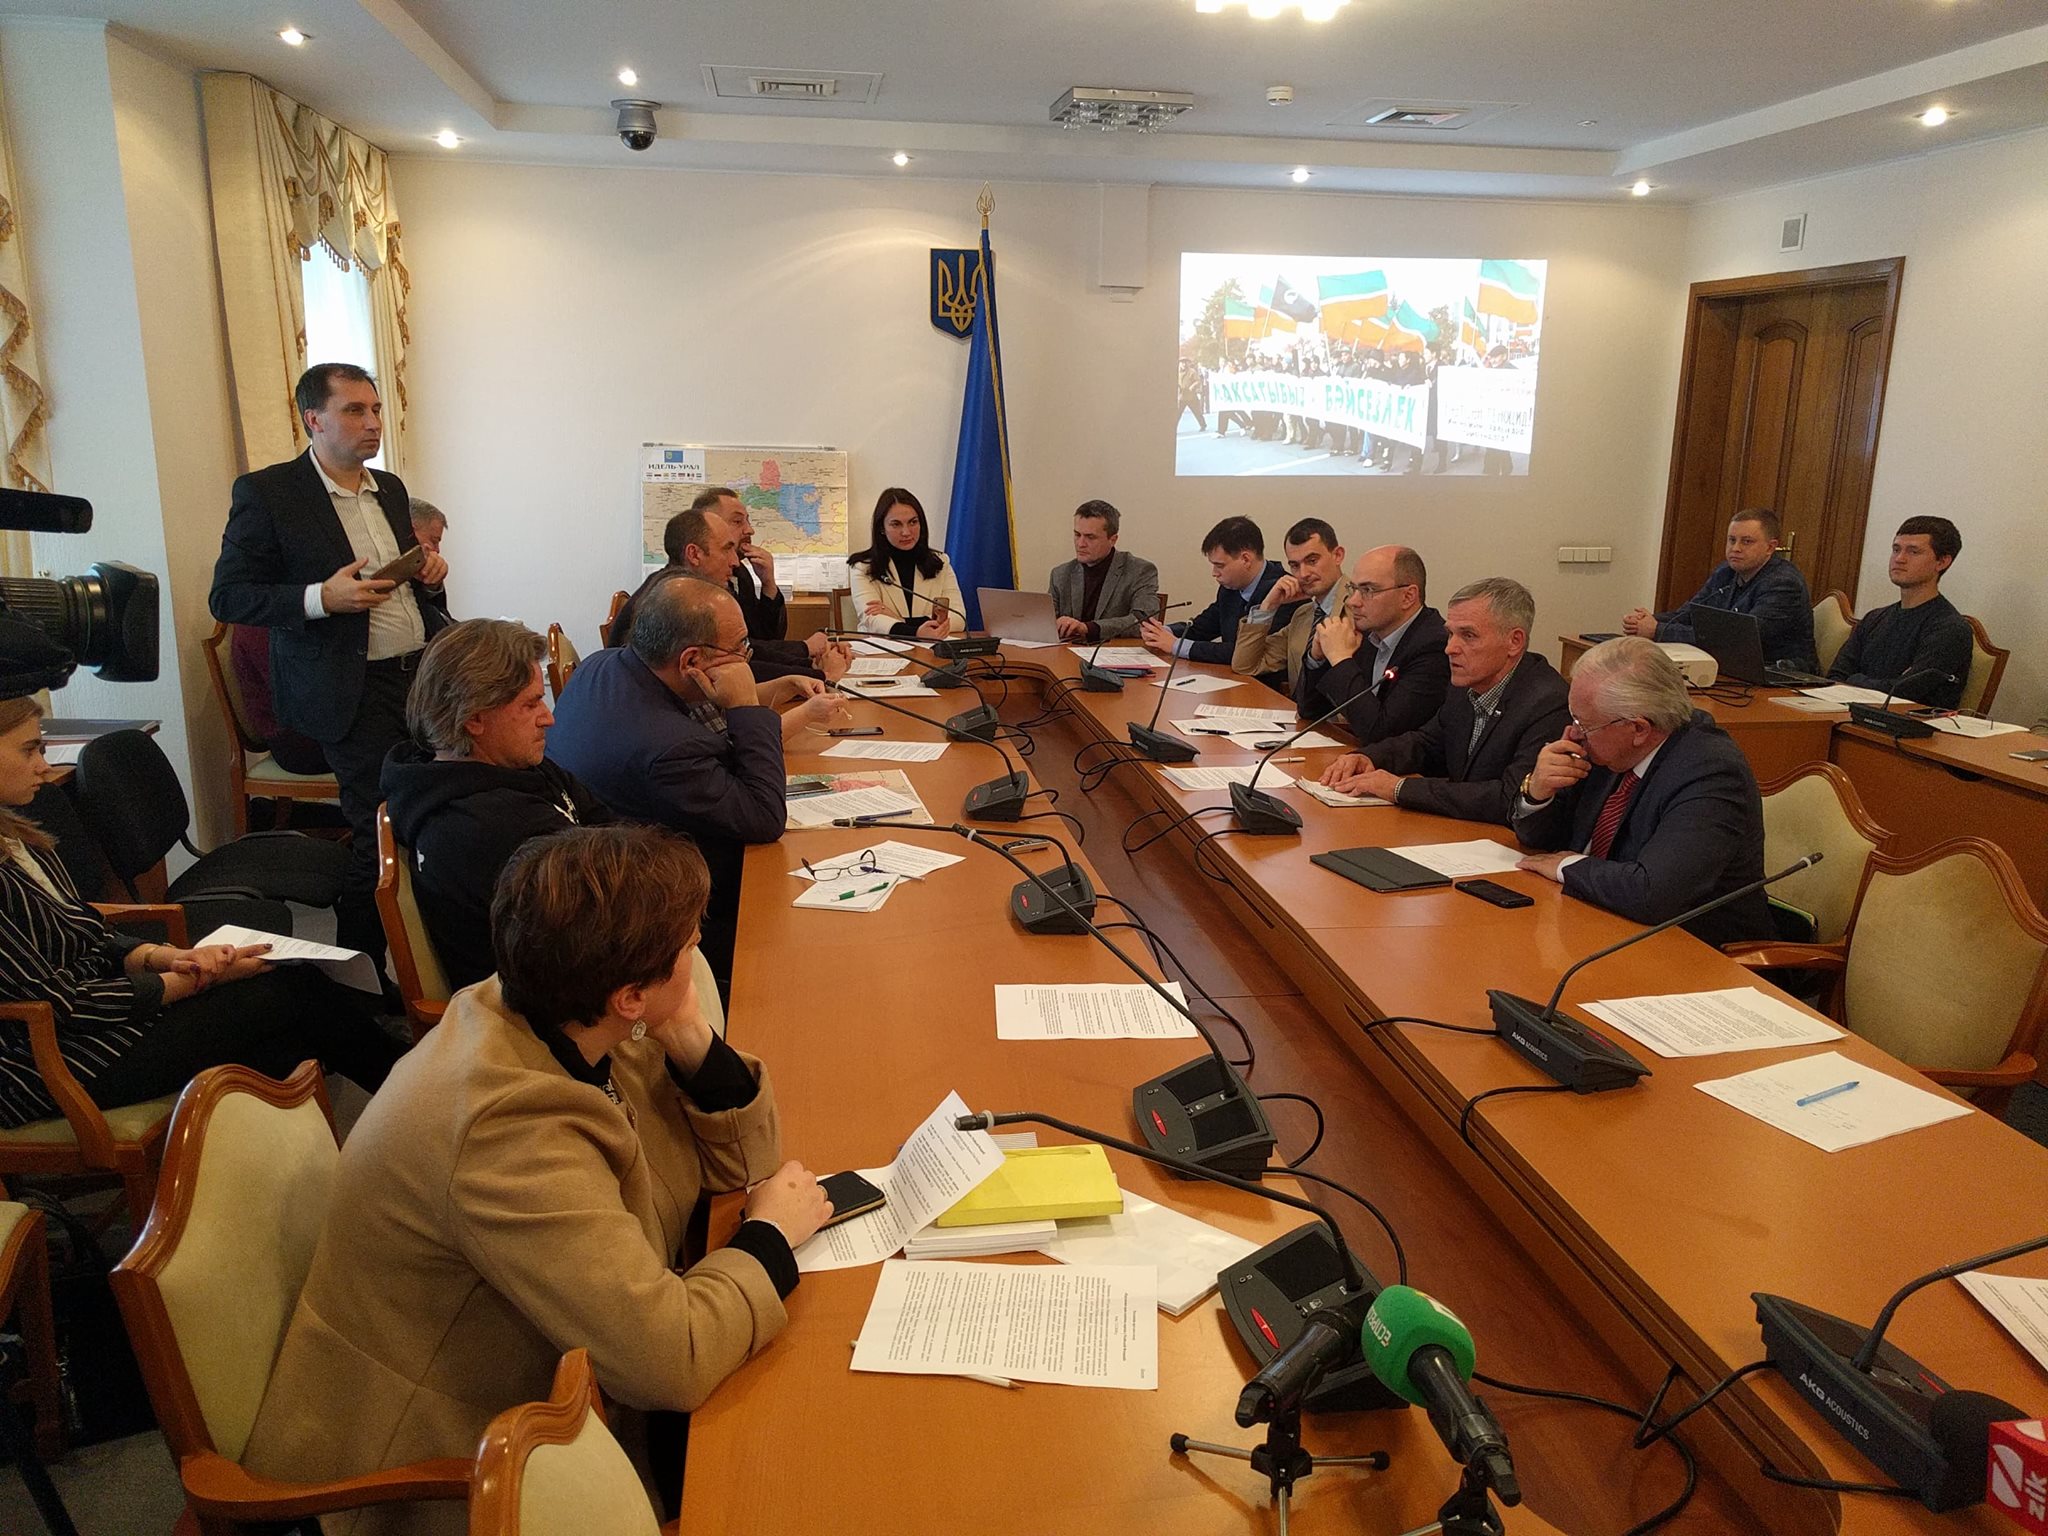 Ukrainian Paliament discussed situation of native peoples of Russia